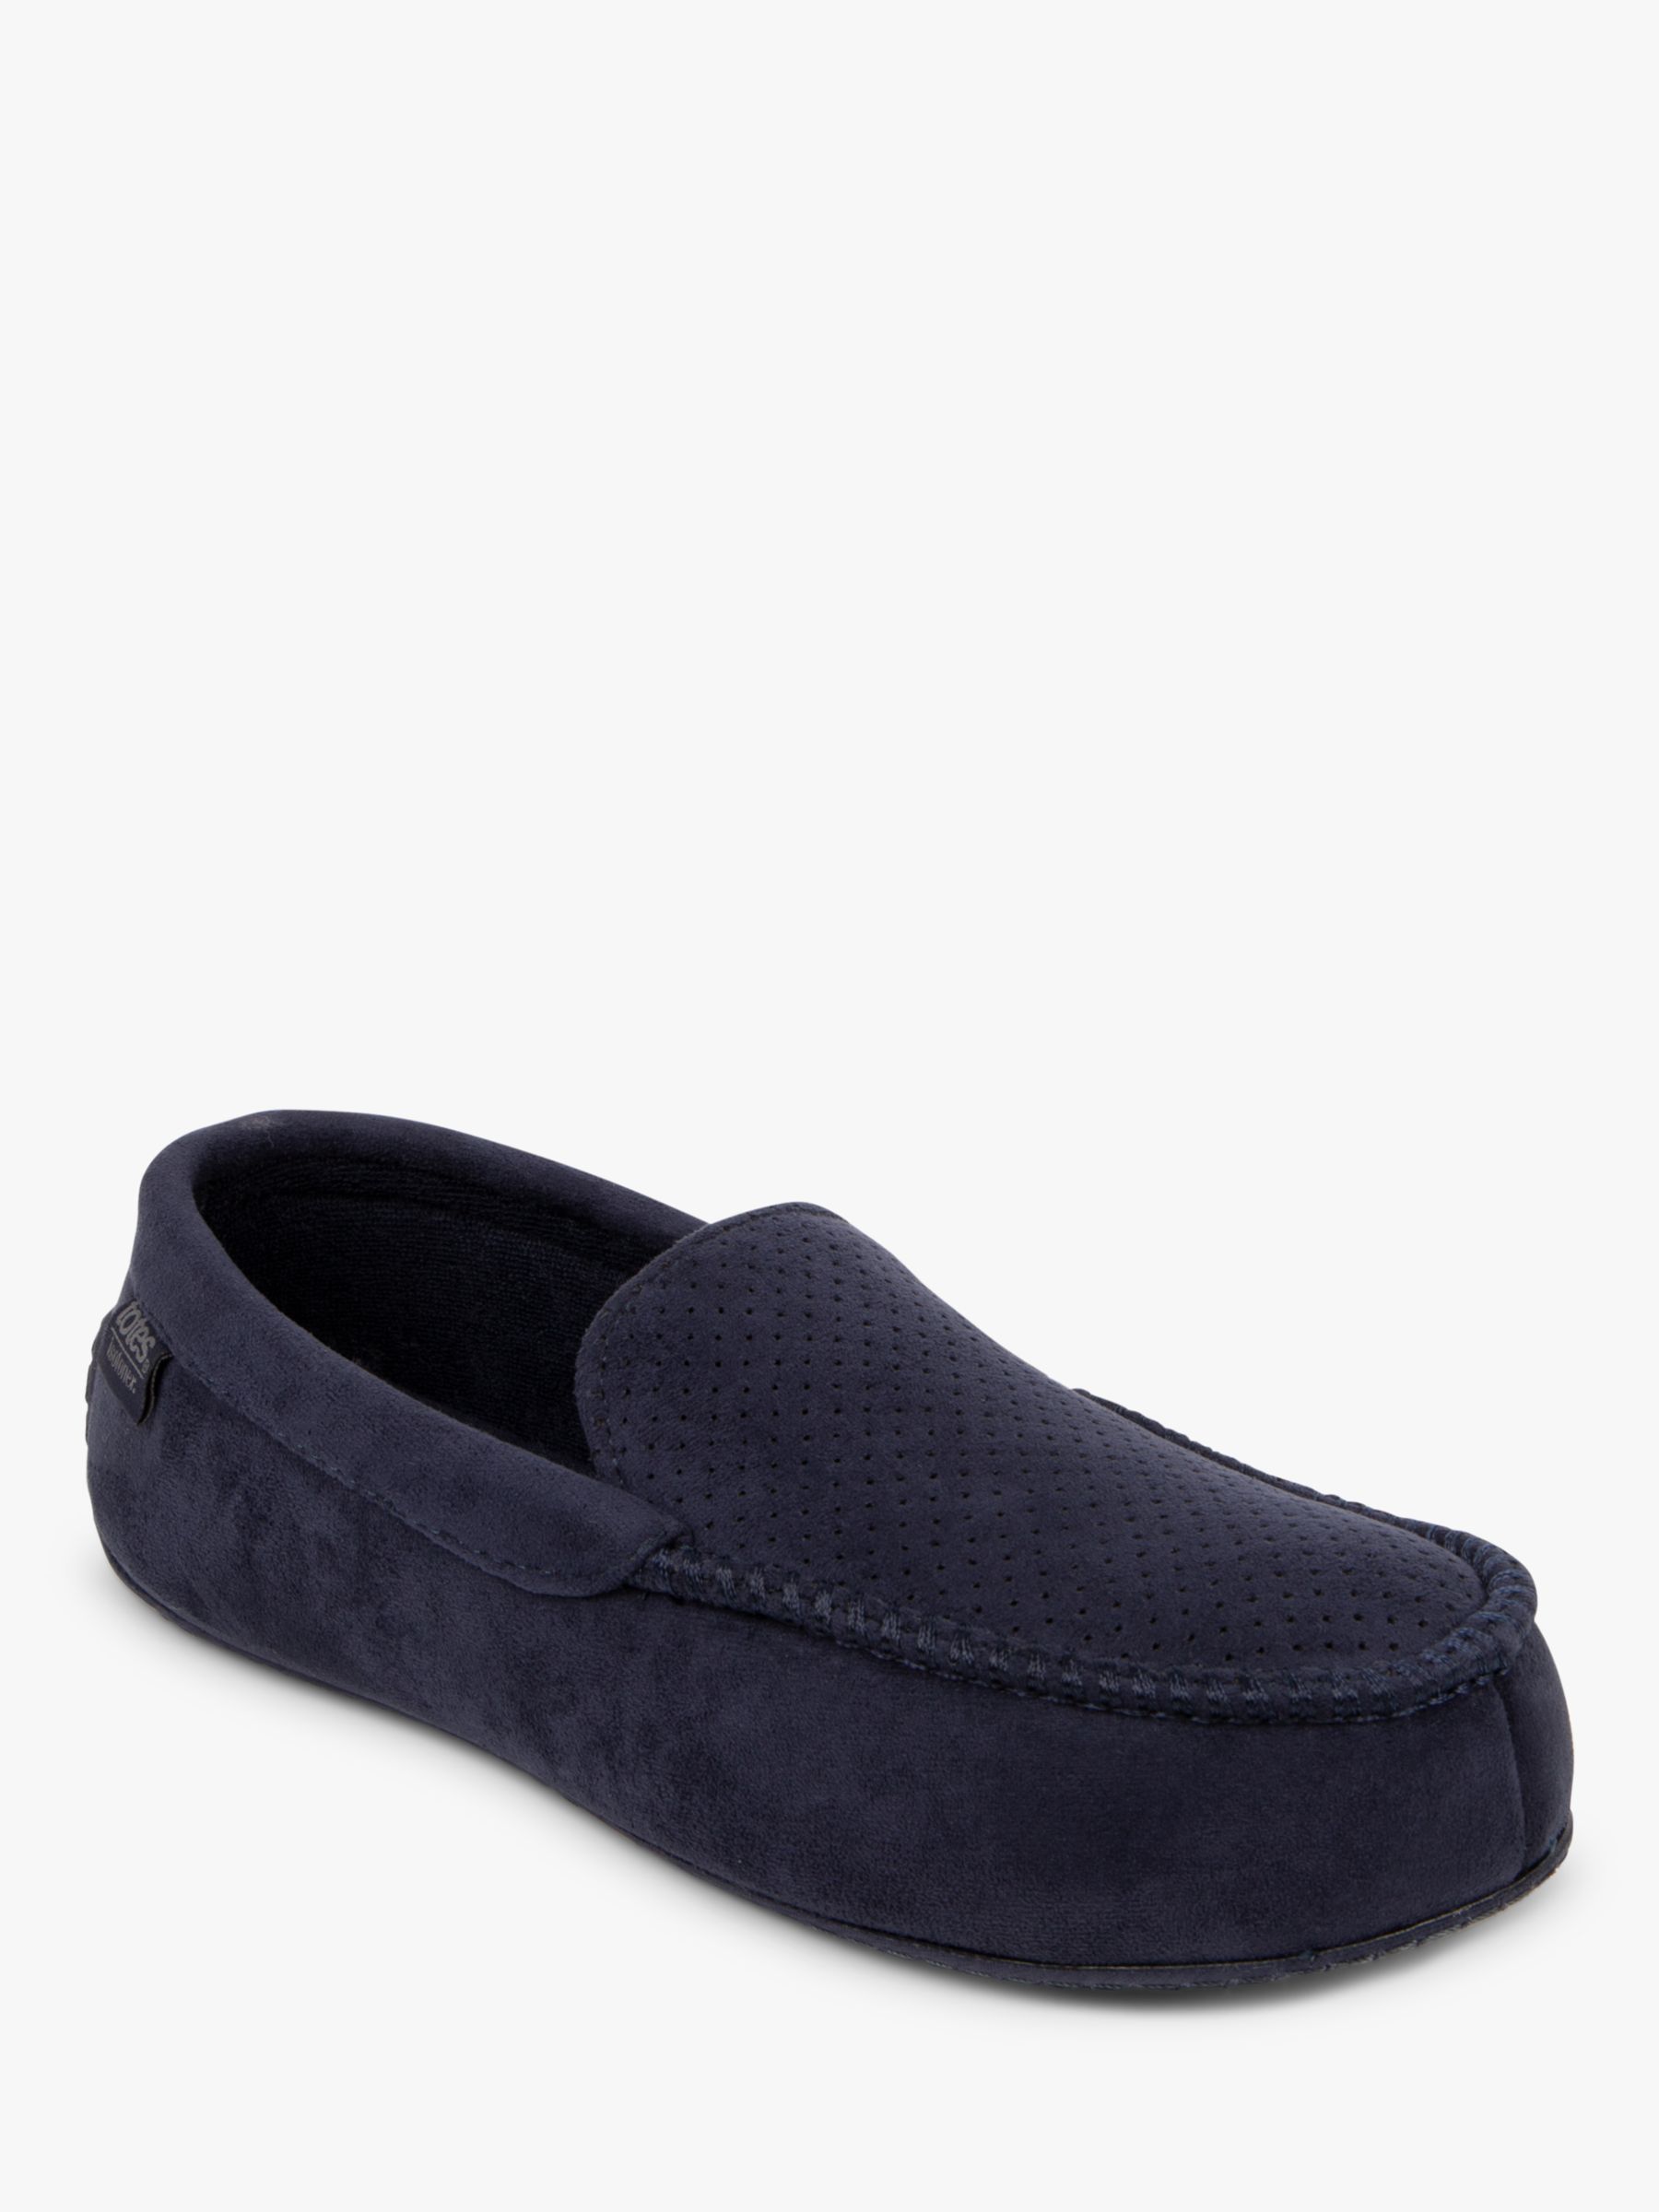 totes Airtex Suedette Moccasin Slippers, Navy, 8